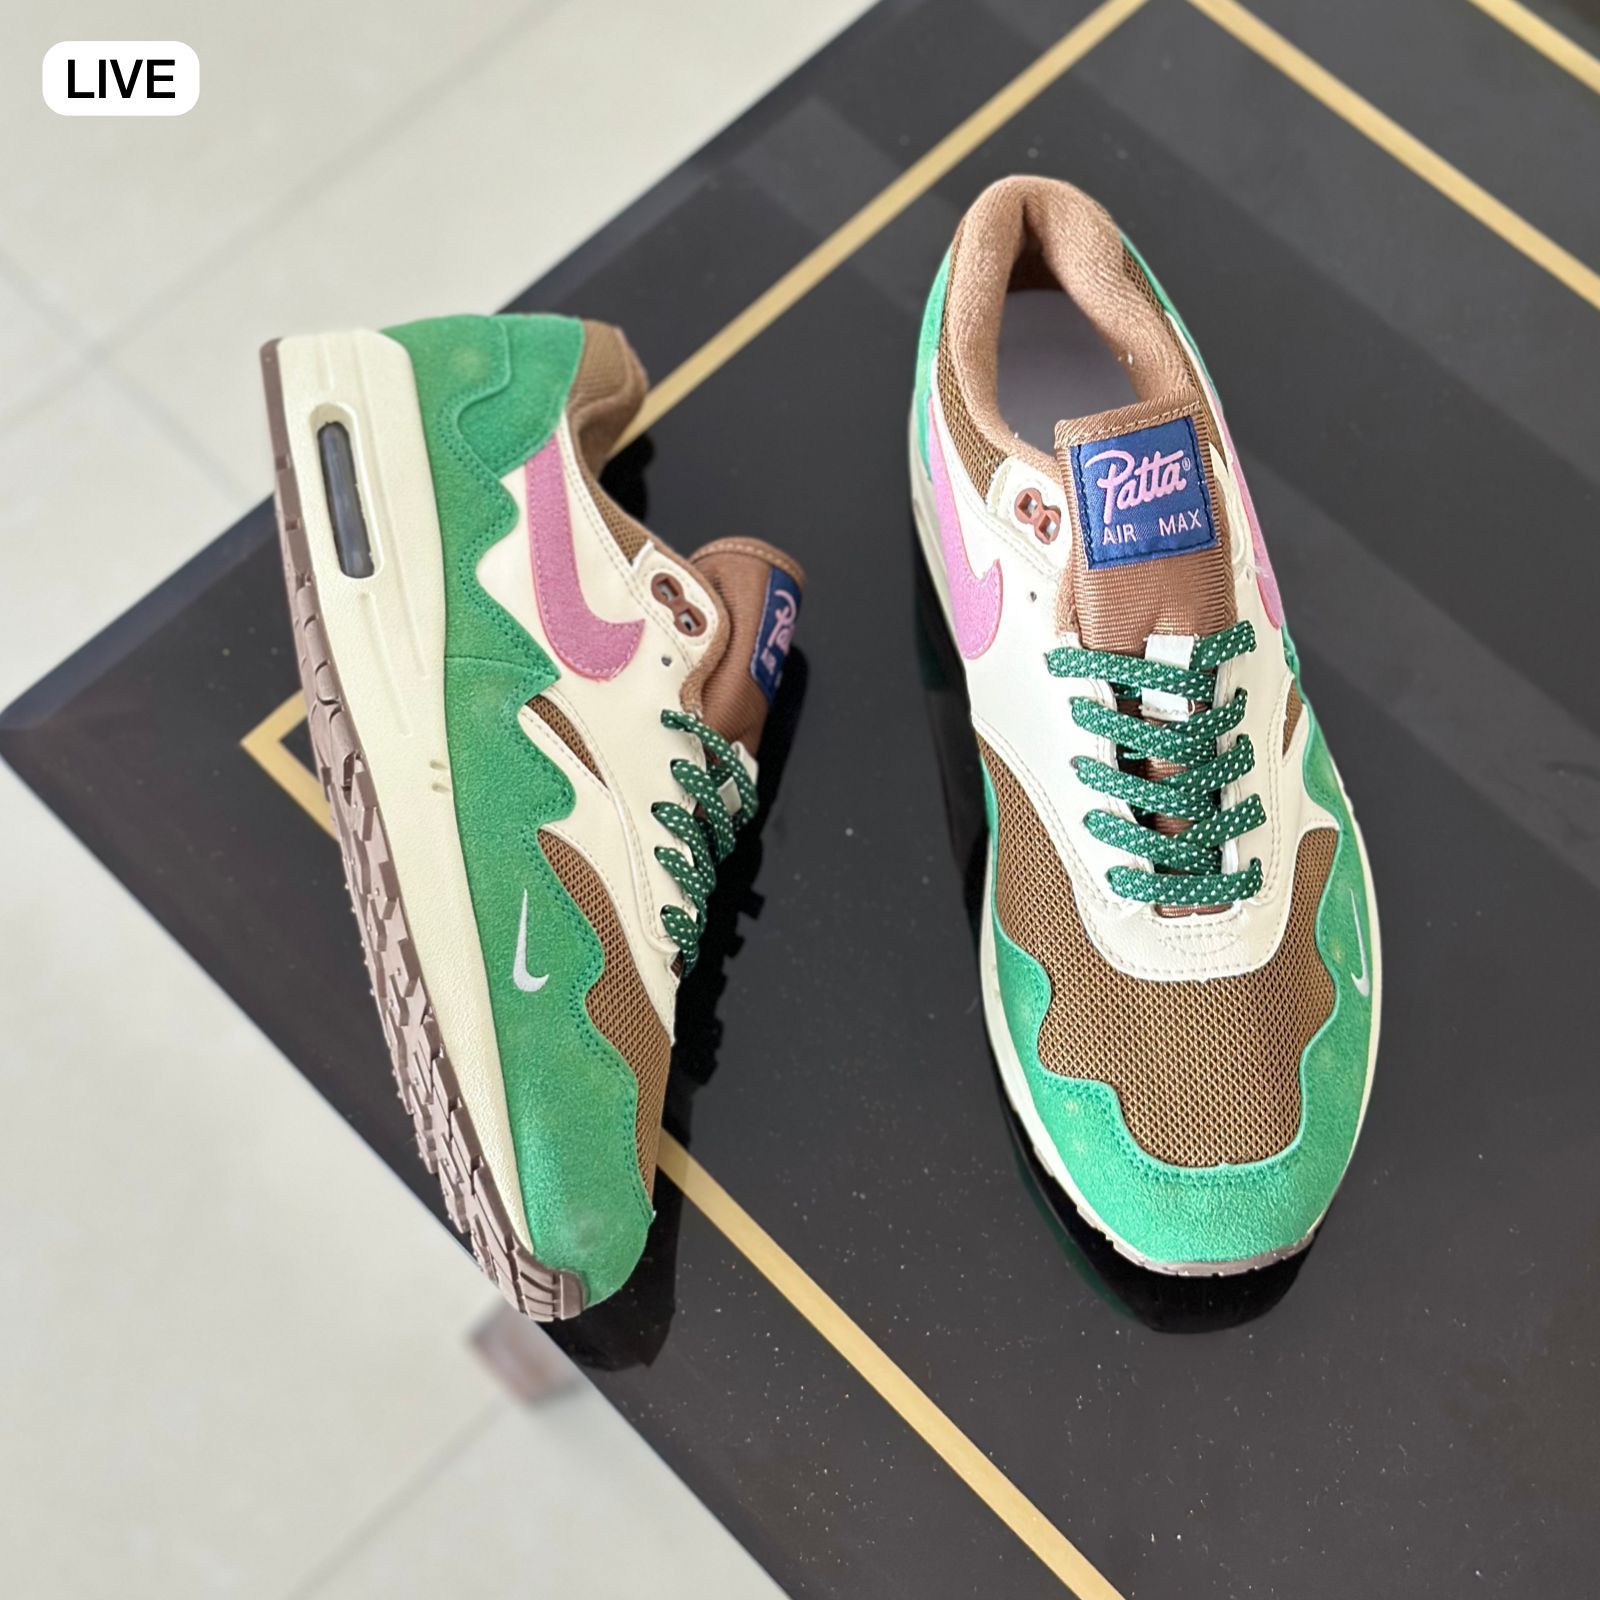 Airmax One Patta Sneakers 2 New Colors